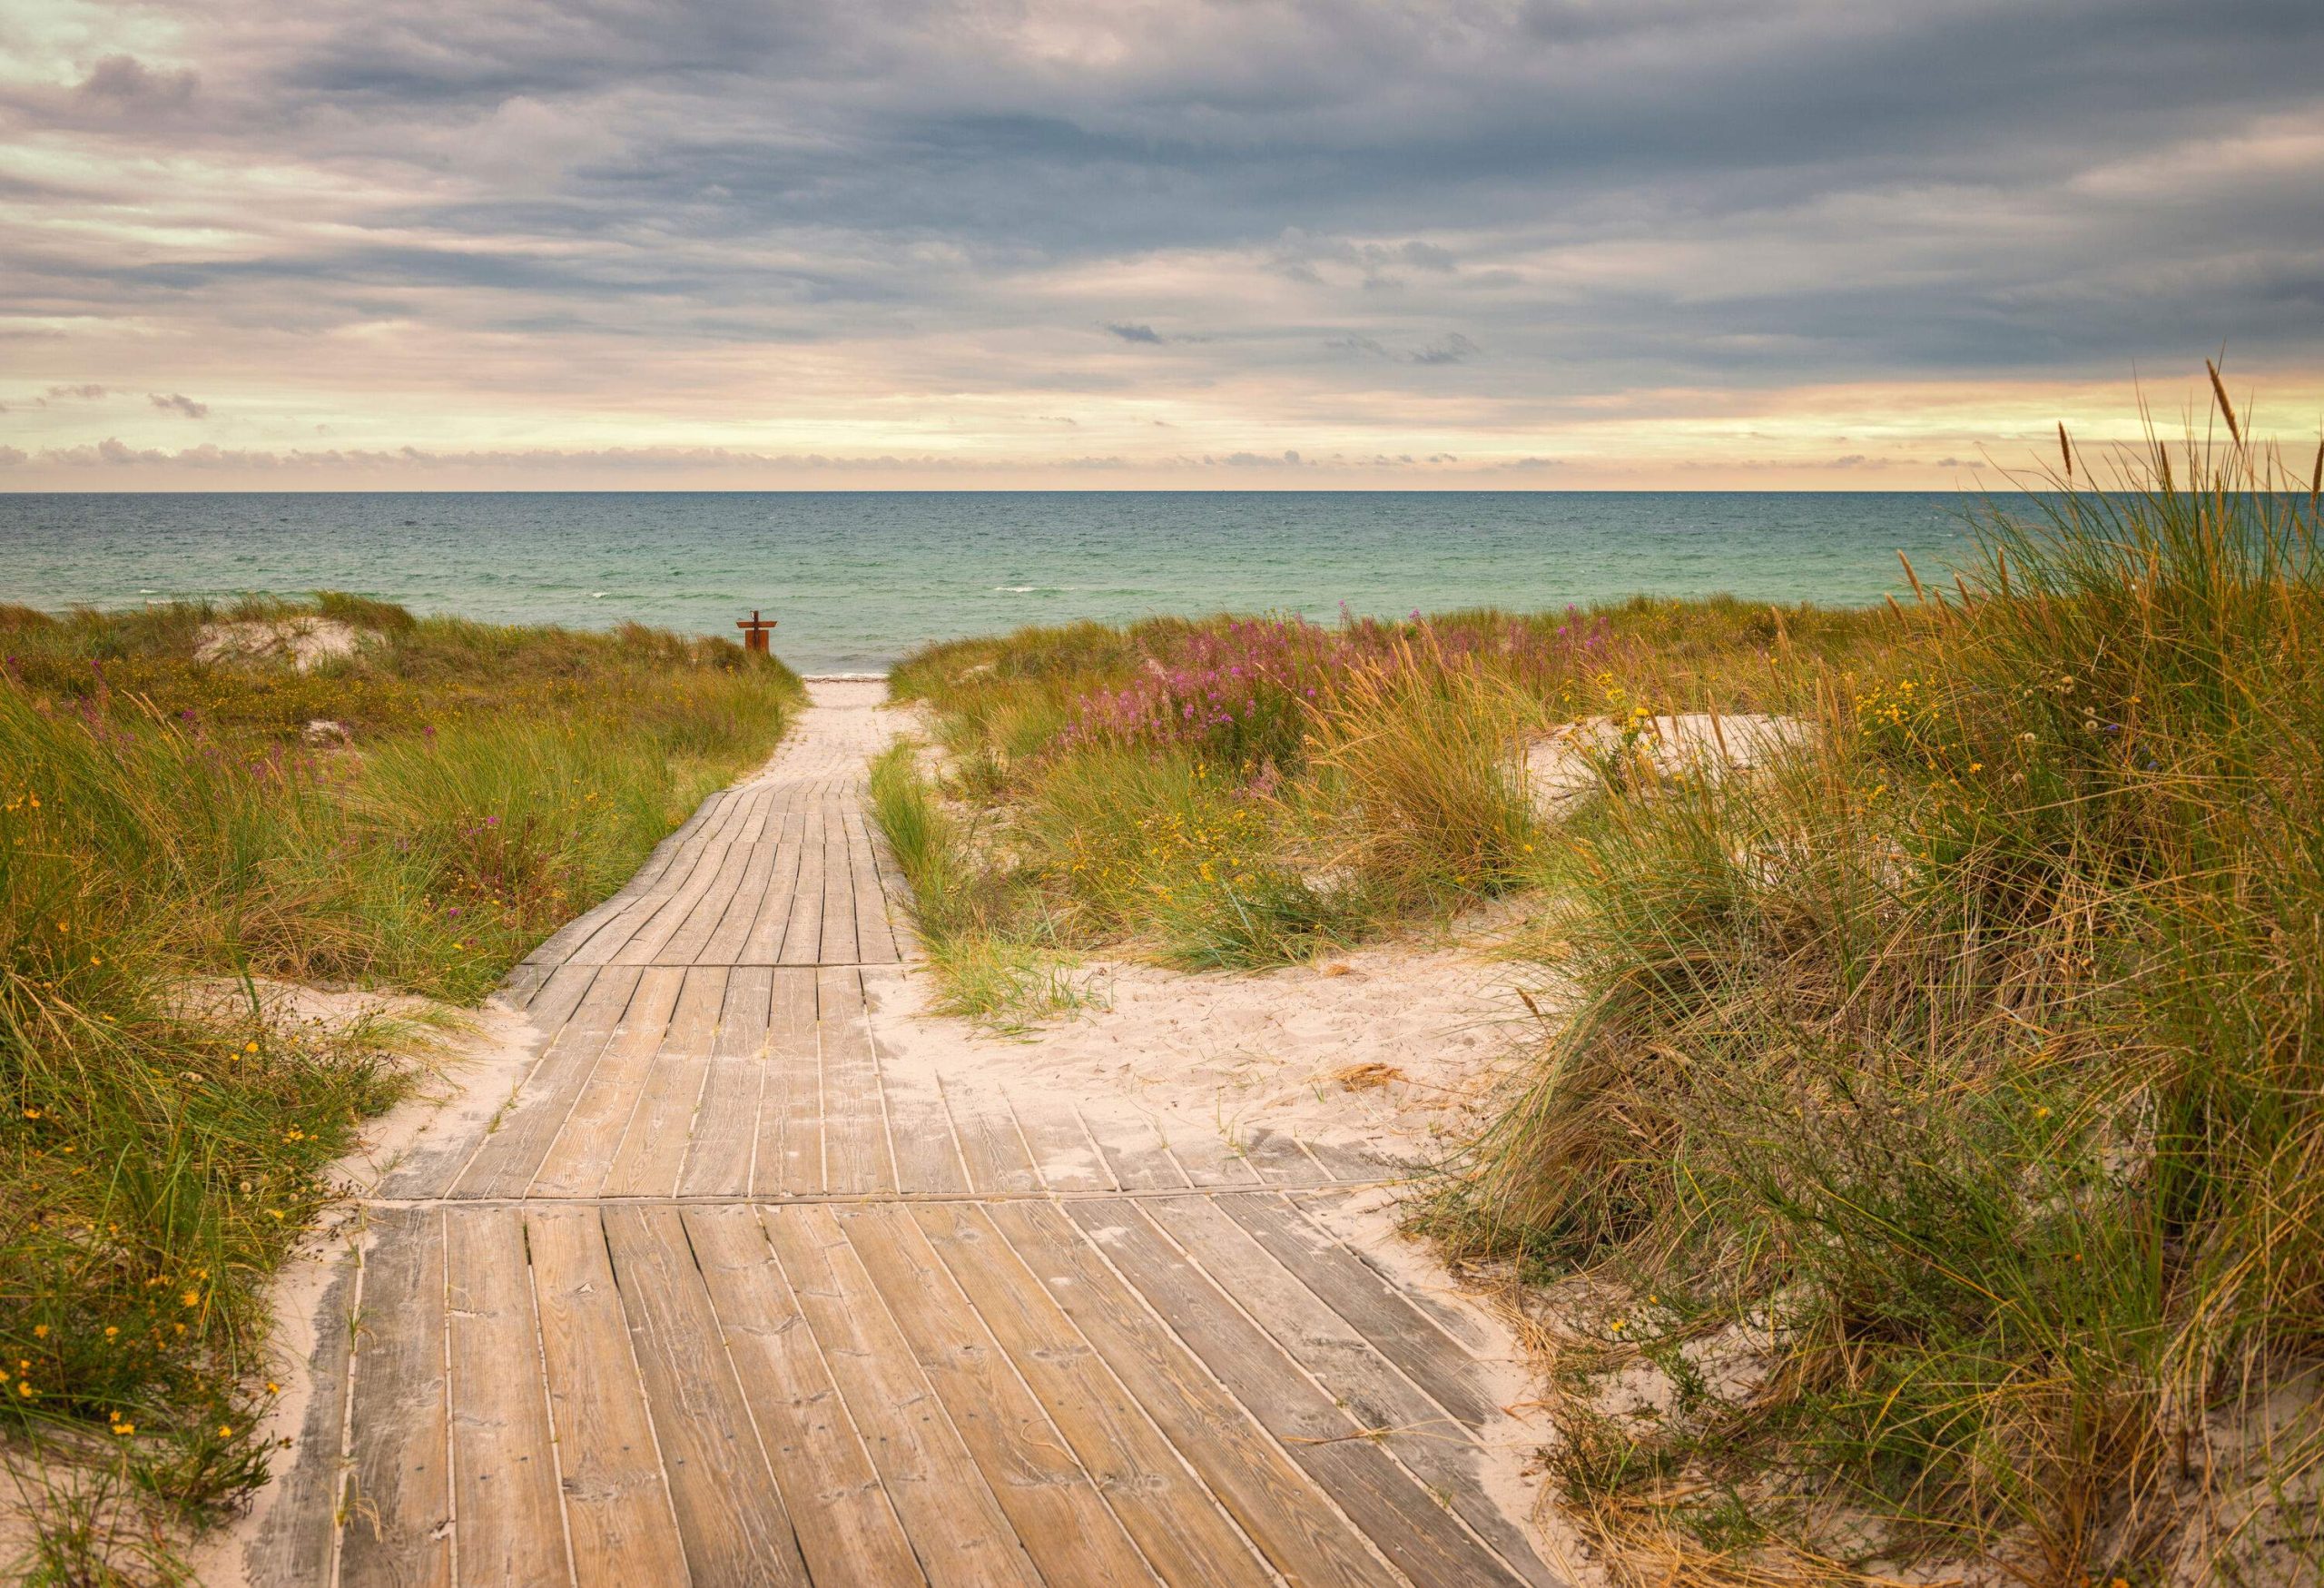 A wooden boardwalk in the middle of lush grass heading down a calm beach.